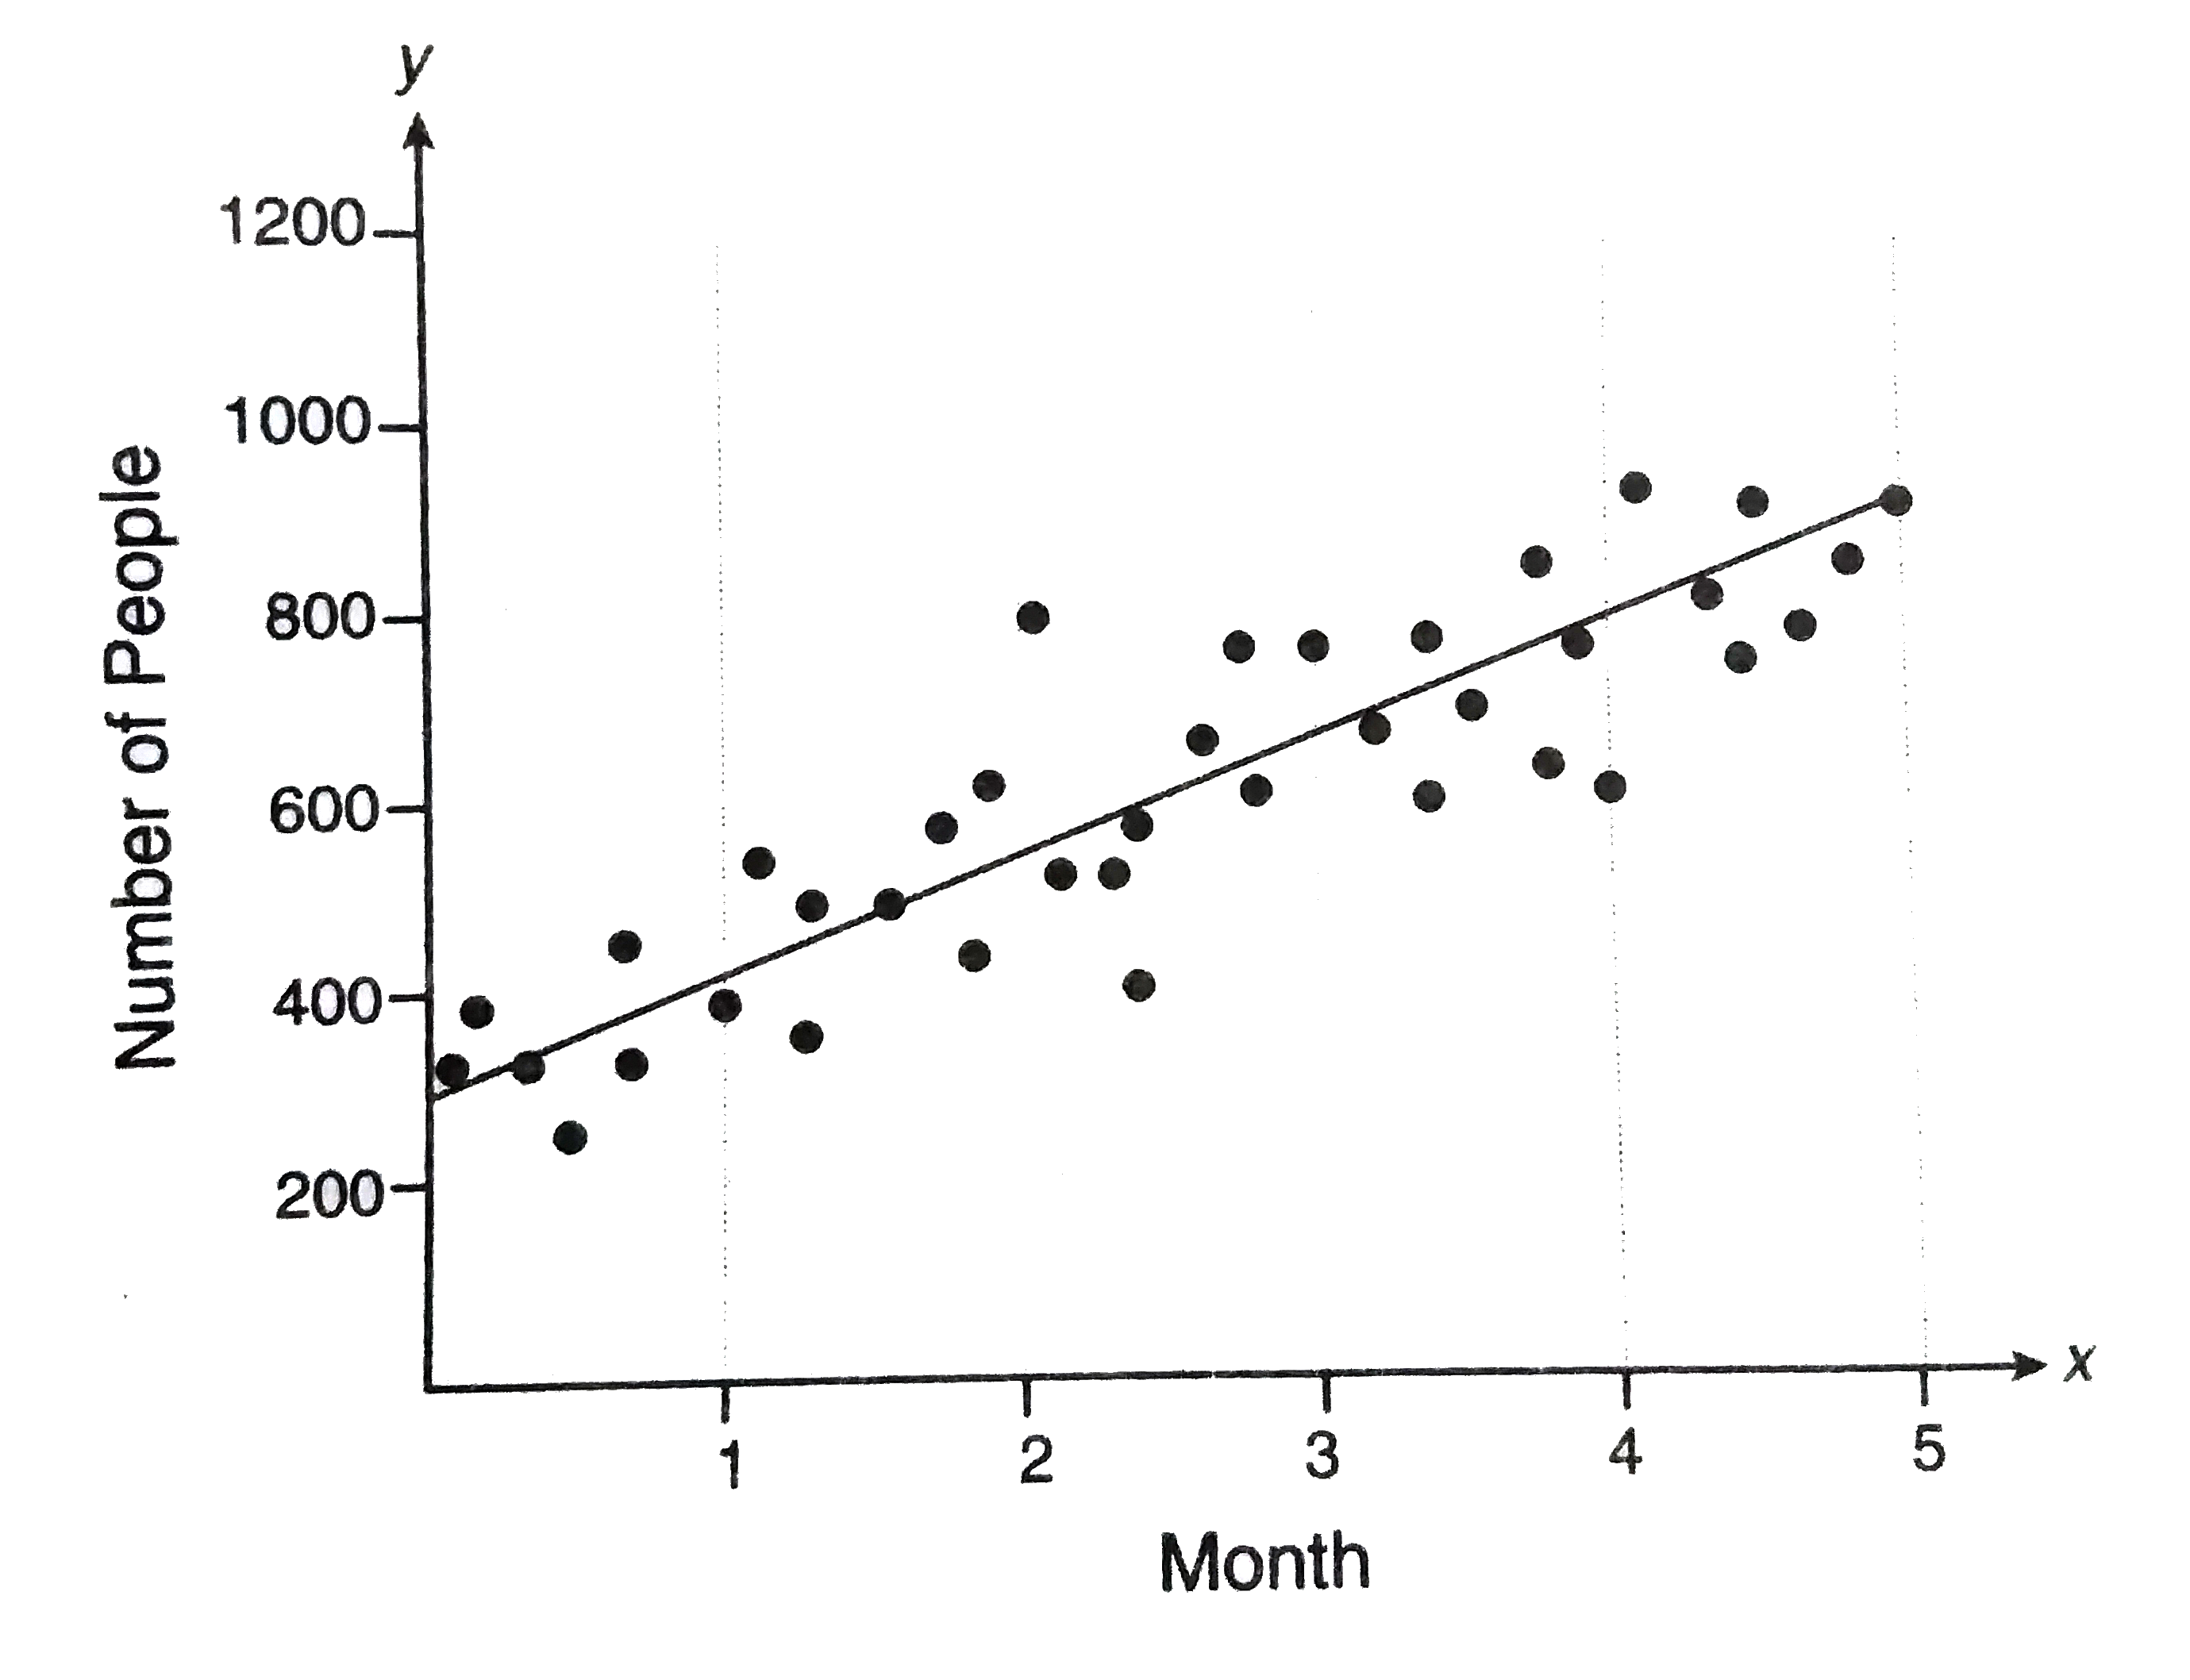 A new fitness class was started at several fitness clubs owned by the same company. The scatterplot shows the total number of people attending the class during the first five months in which the class was offered. The line of best fit is drawn.   Q. For month 4, the predicted number of people attending the class was approximately what percent greater than the actual number of people attending the class?